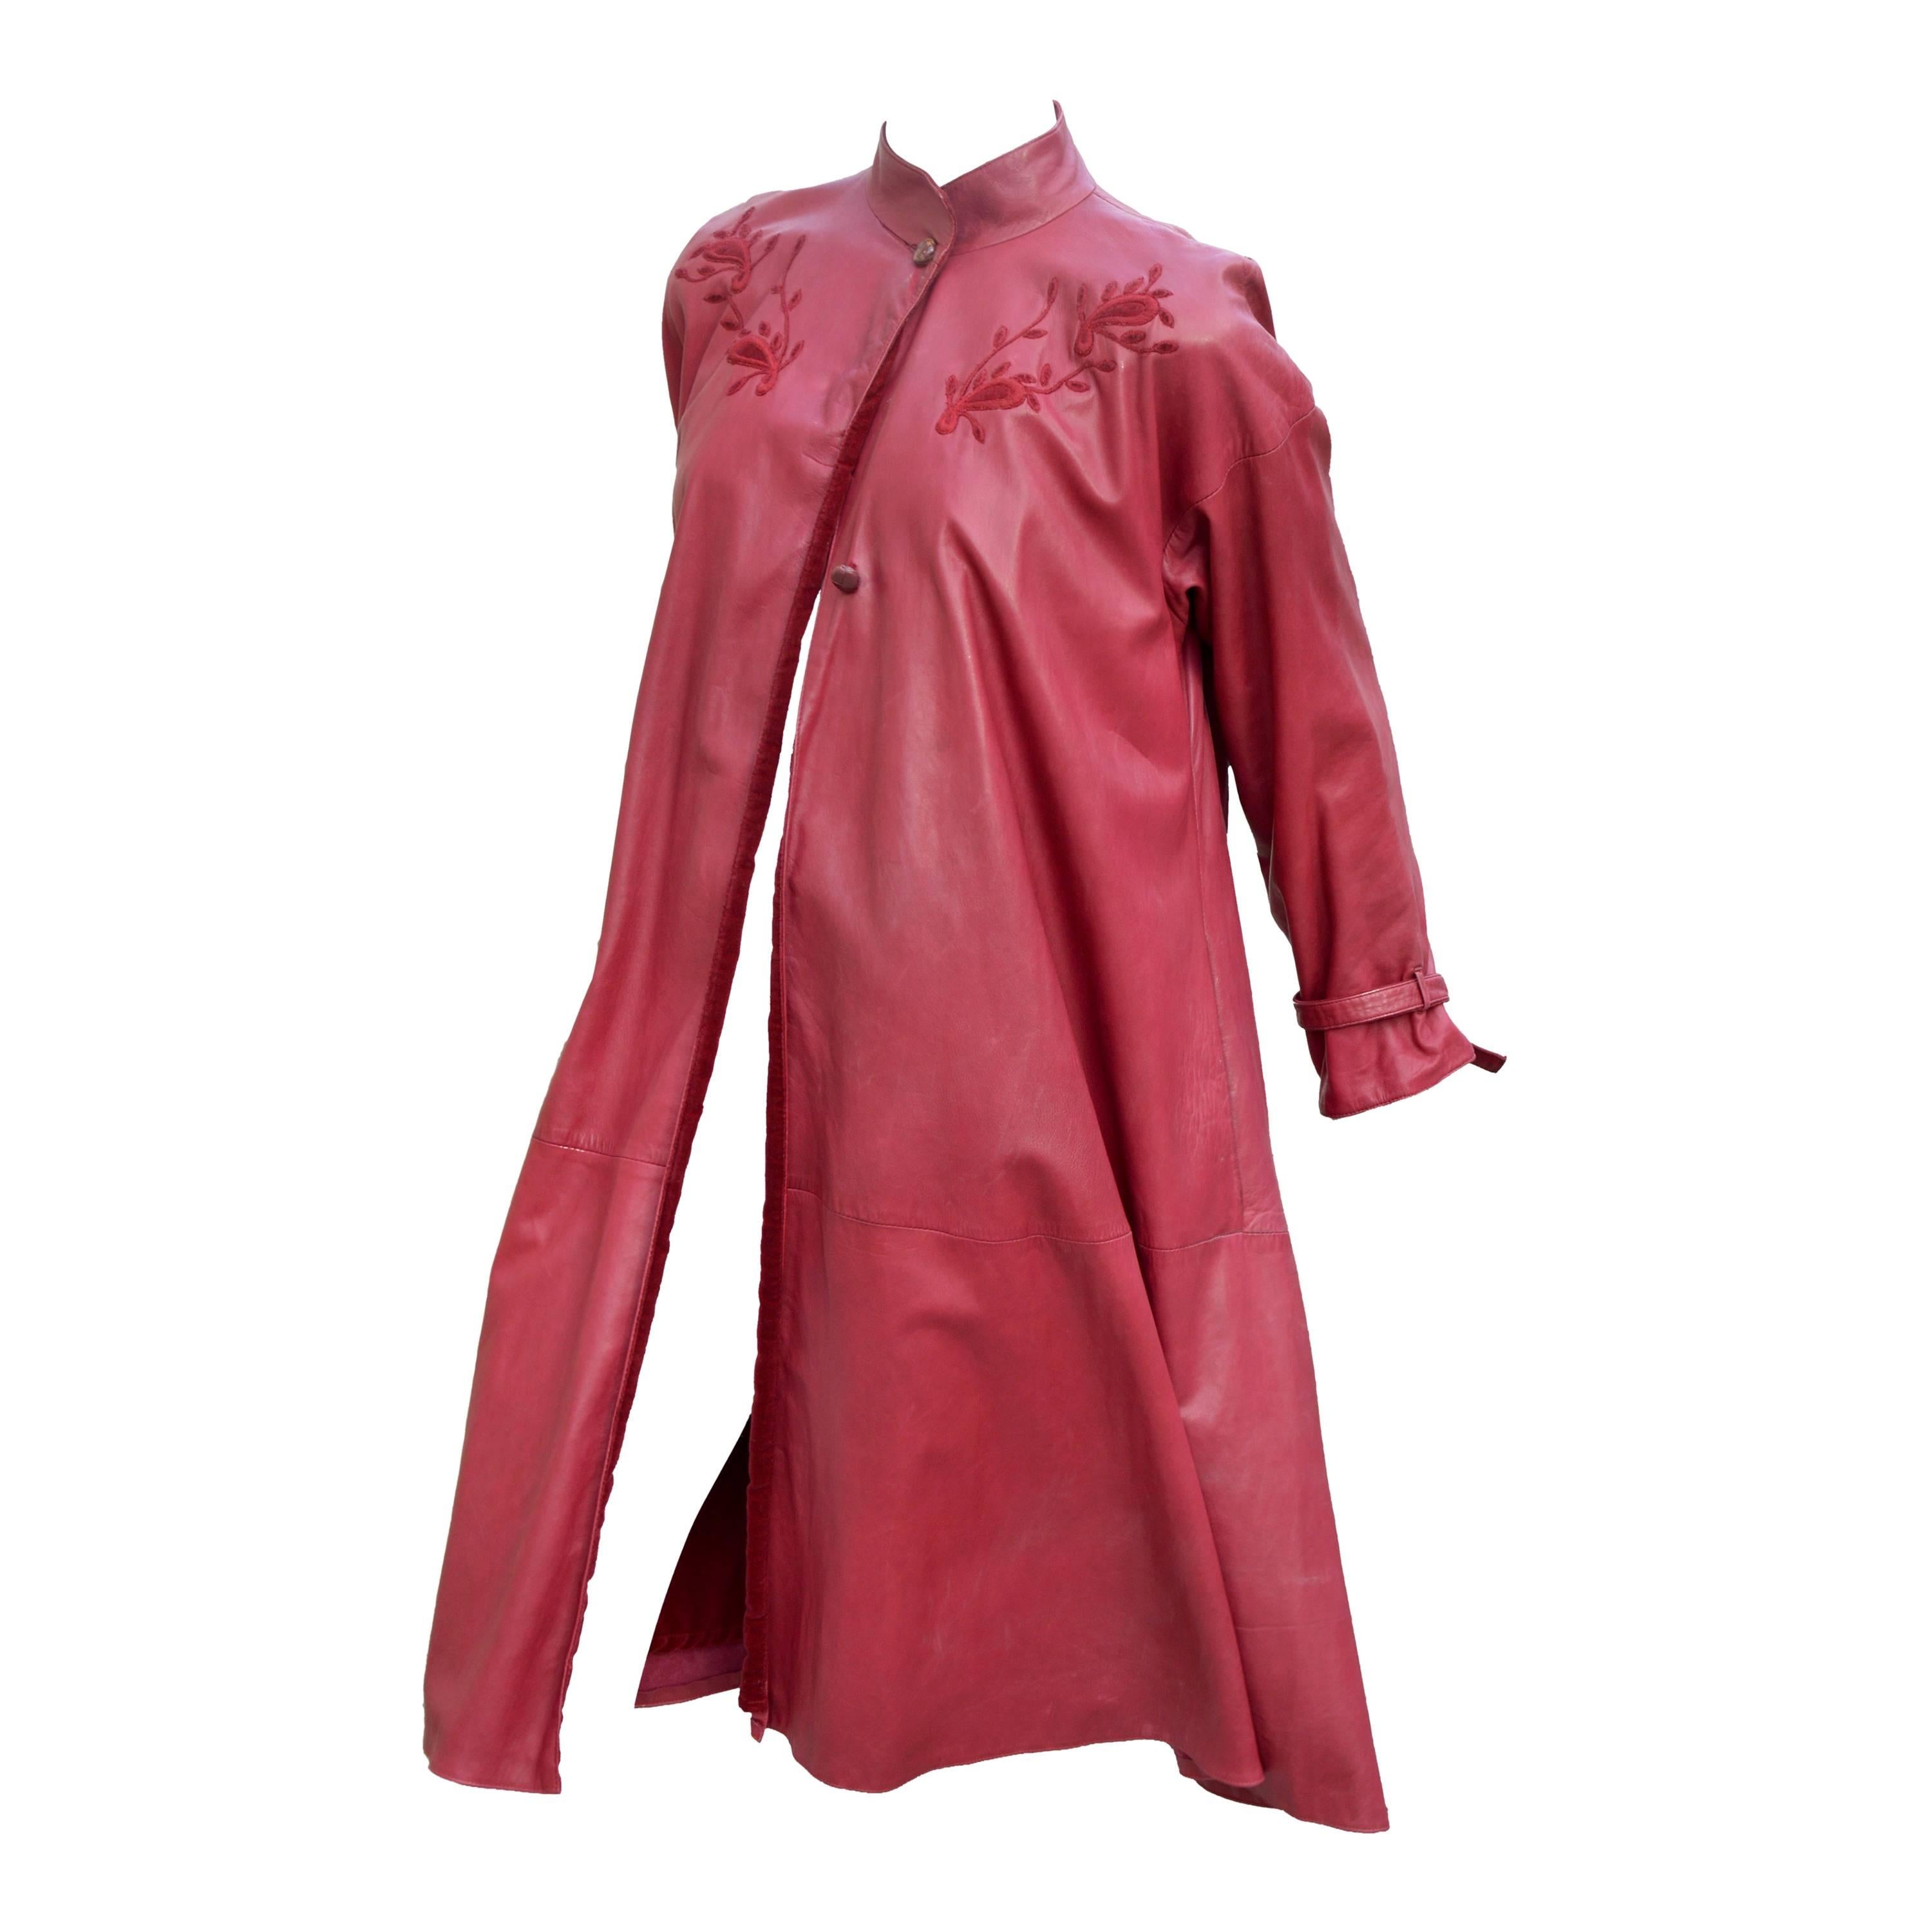 Ultra-soft, and supple, lambskin leather fabrication featuring toning discreet but noticeable delicate floral embroideries, Two side pockets,Fully lined with deeper red silk velvet.
Condition: Very good, shows very little signs of wear. This is a